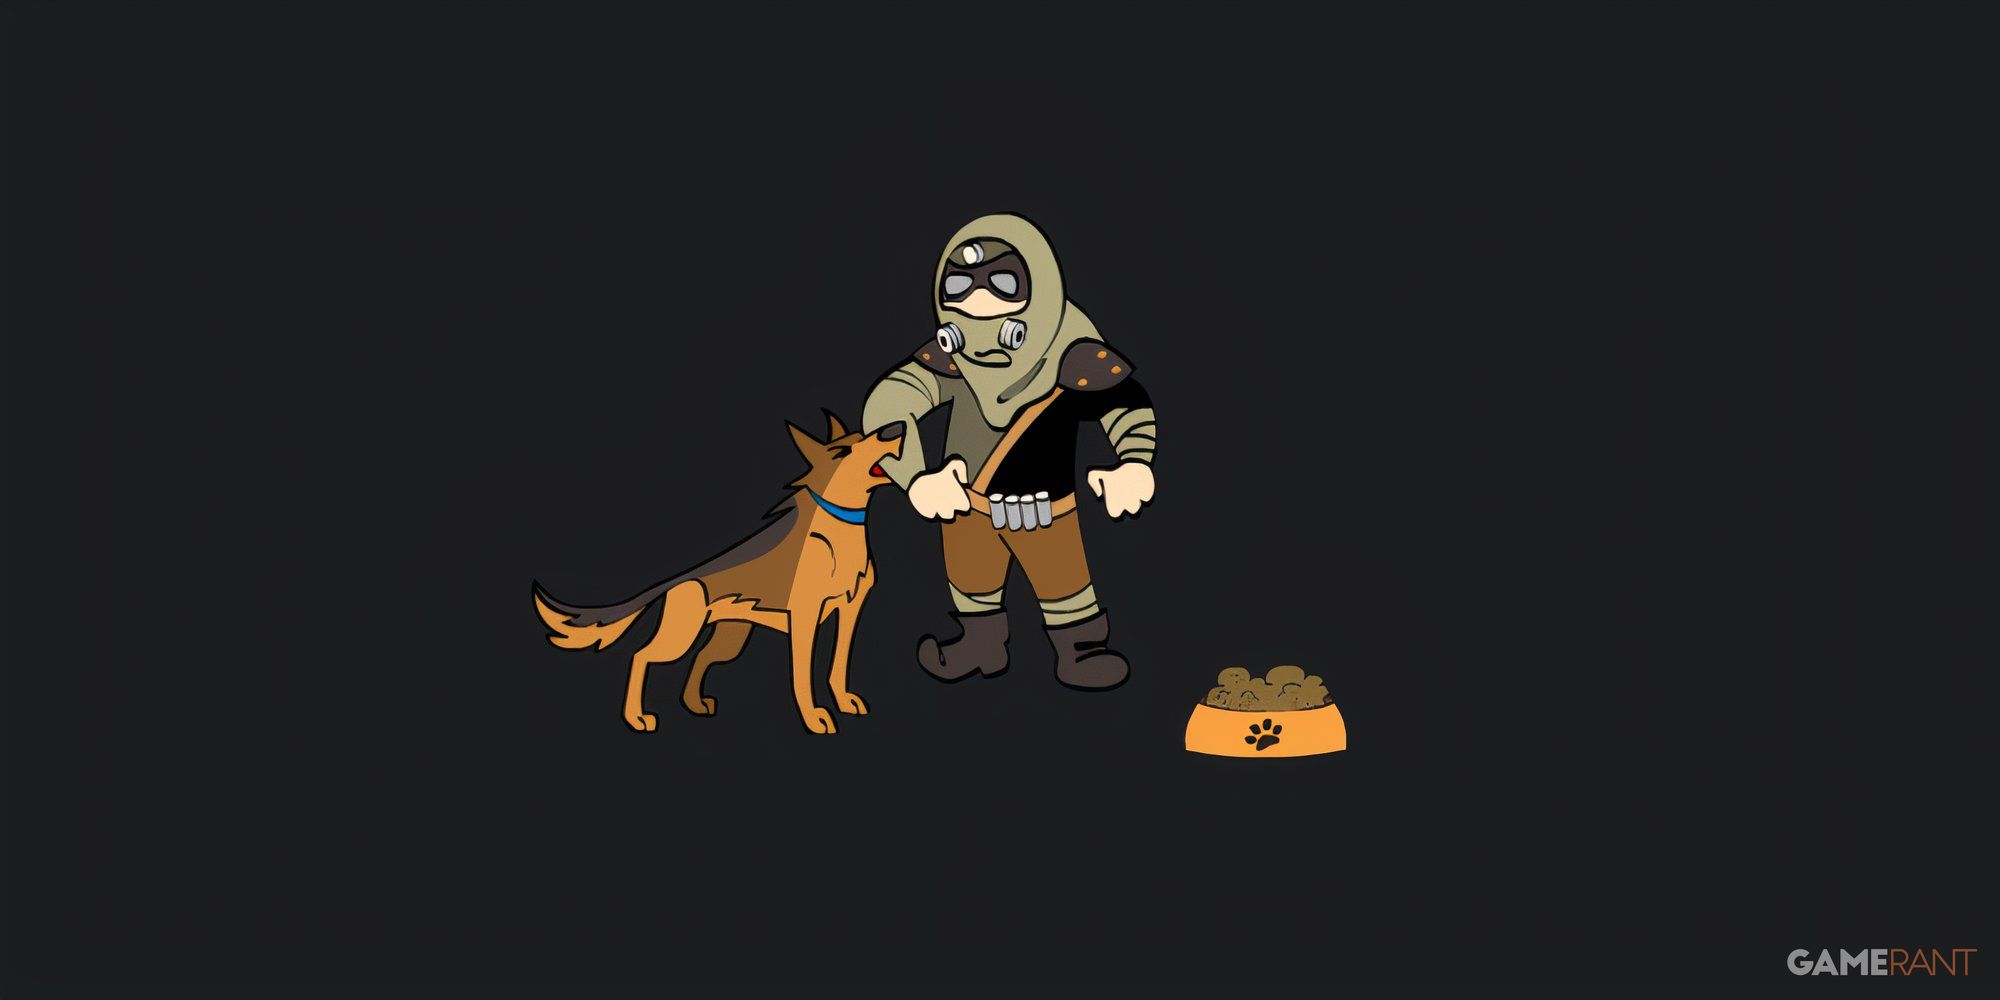 The image for the perk, Attack Dog